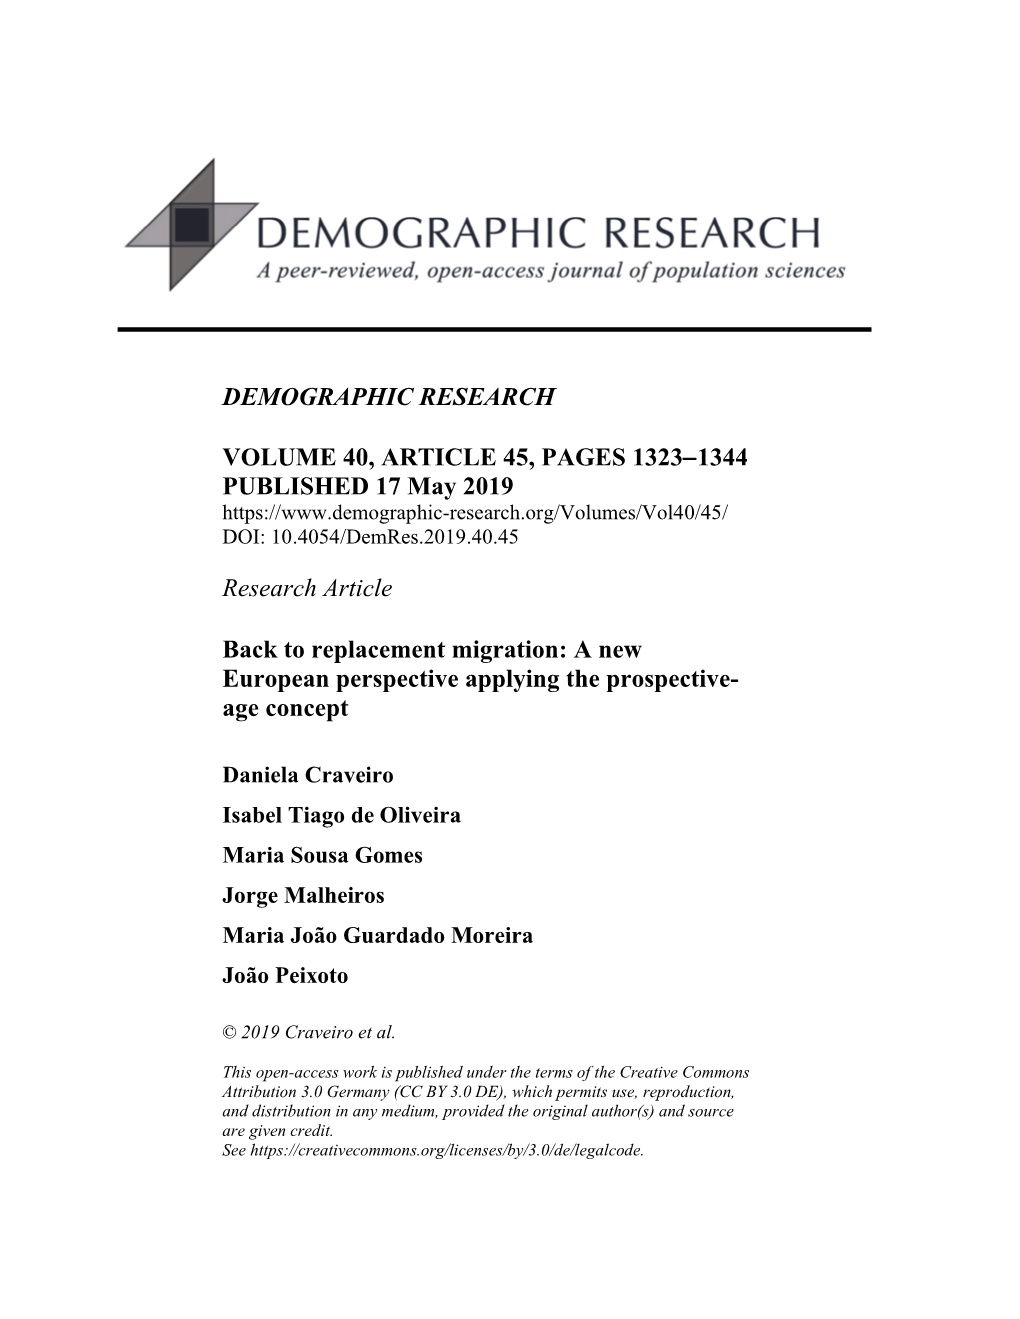 Back to Replacement Migration: a New European Perspective Applying the Prospective-Age Concept